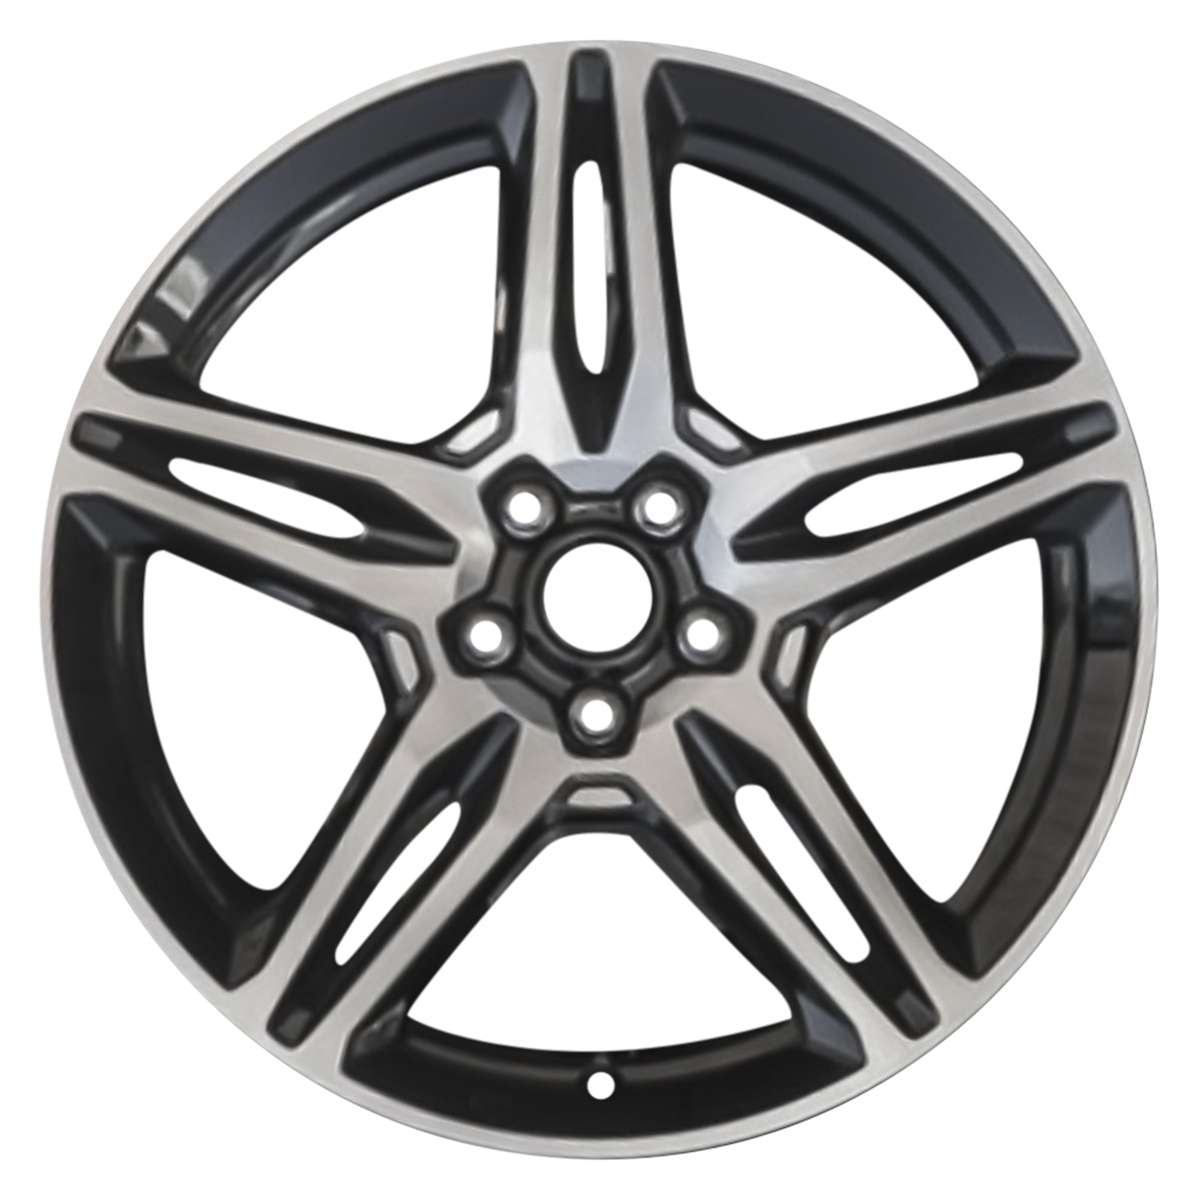 2019 Ford Fusion New 19" Replacement Wheel Rim RW10199MB